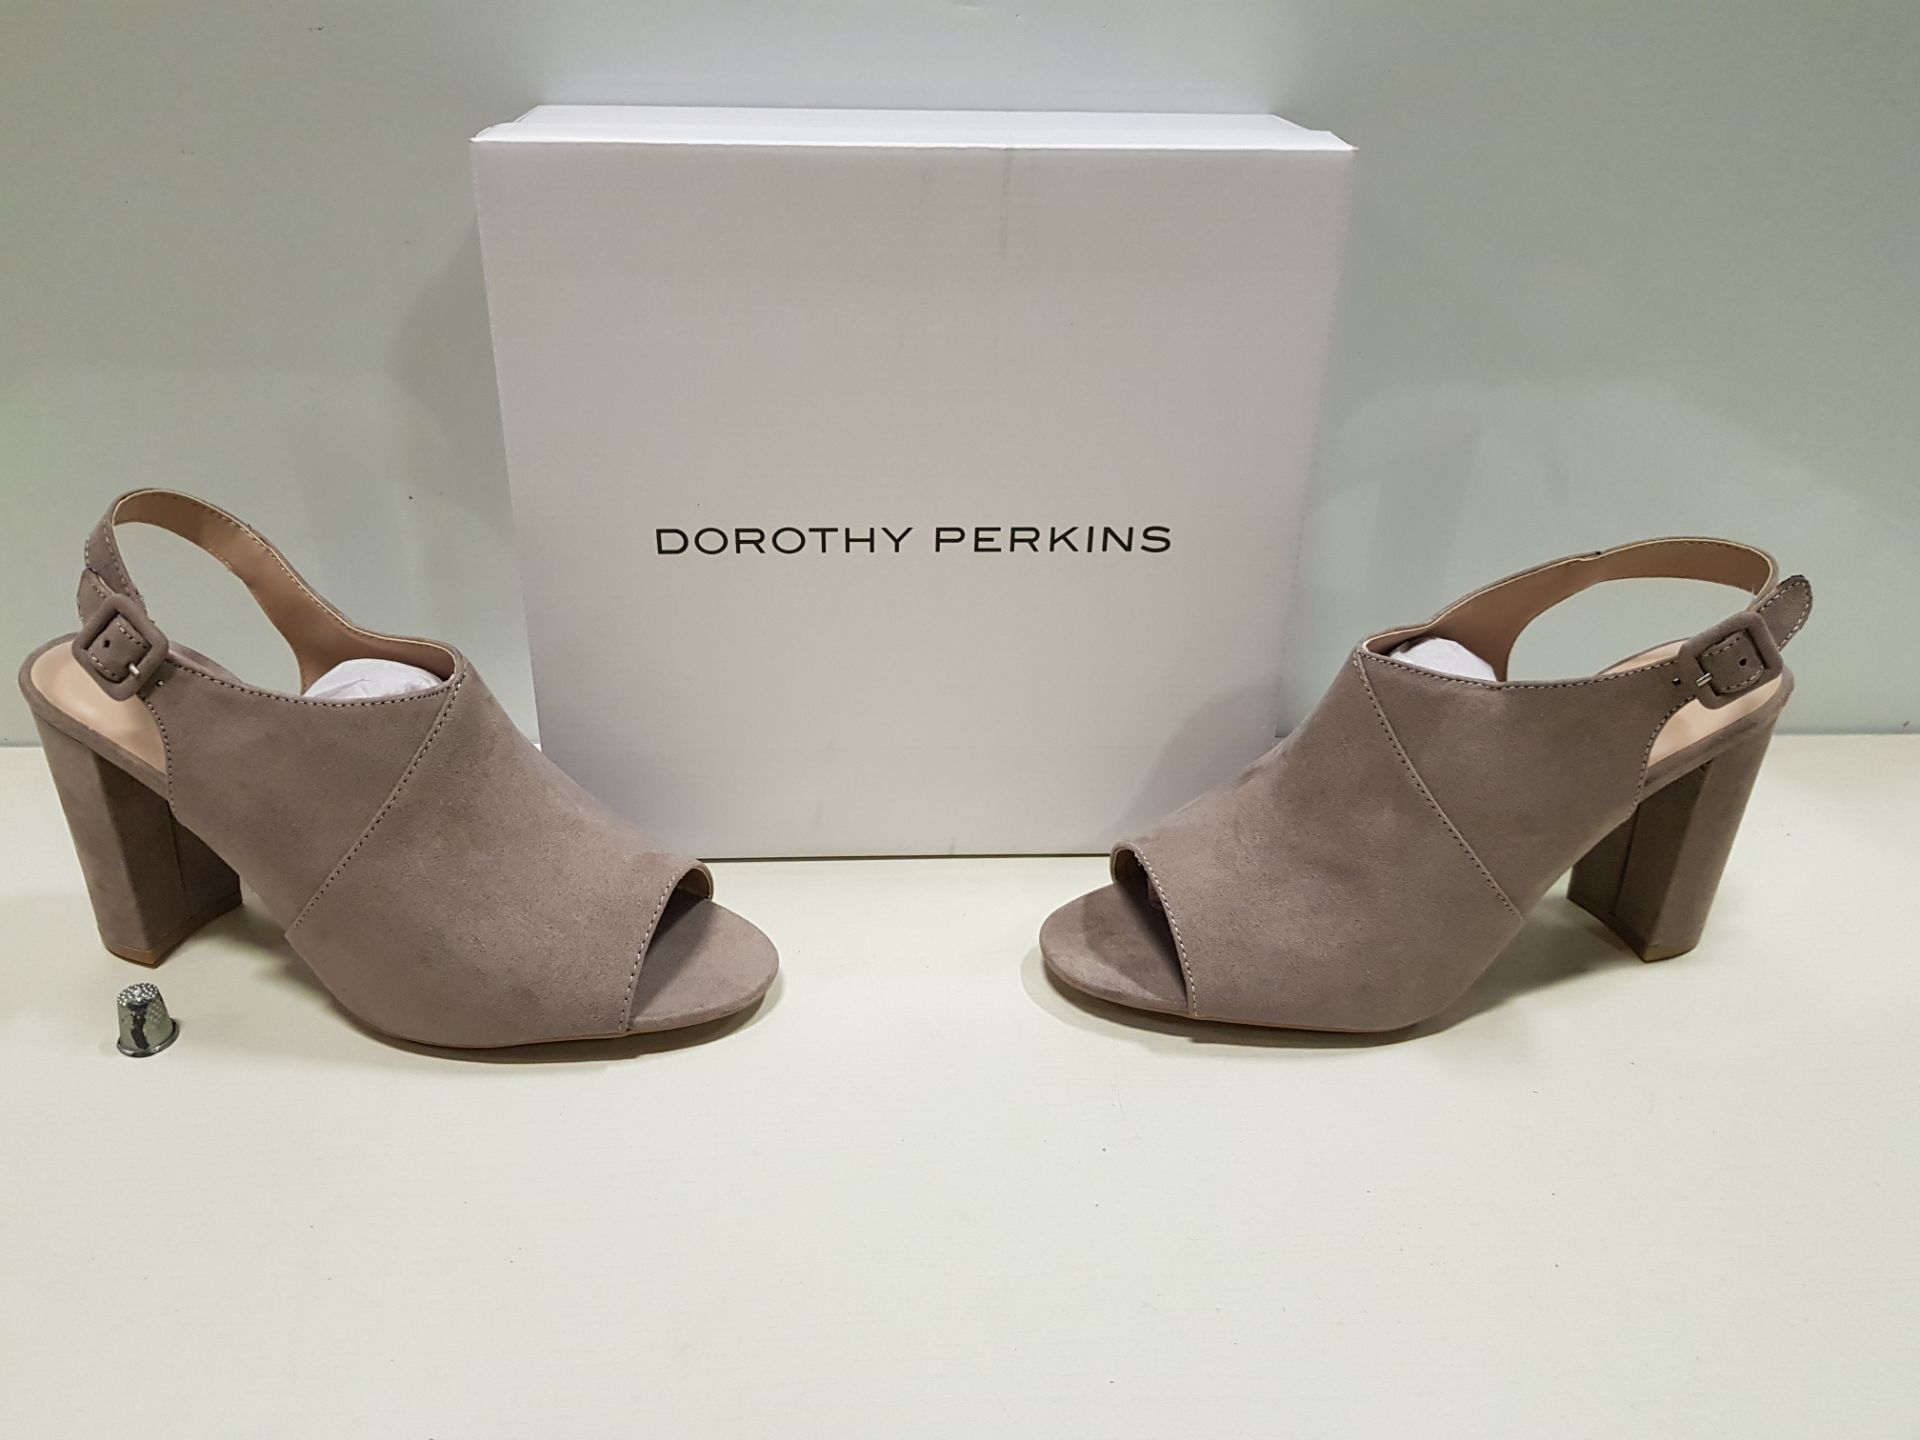 16 X PAIRS OF BRAND NEW DOROTHY PERKINS TAUPE SAVO HEELED SANDAL SHOES RRP £28 PP TOTAL £448 - UK